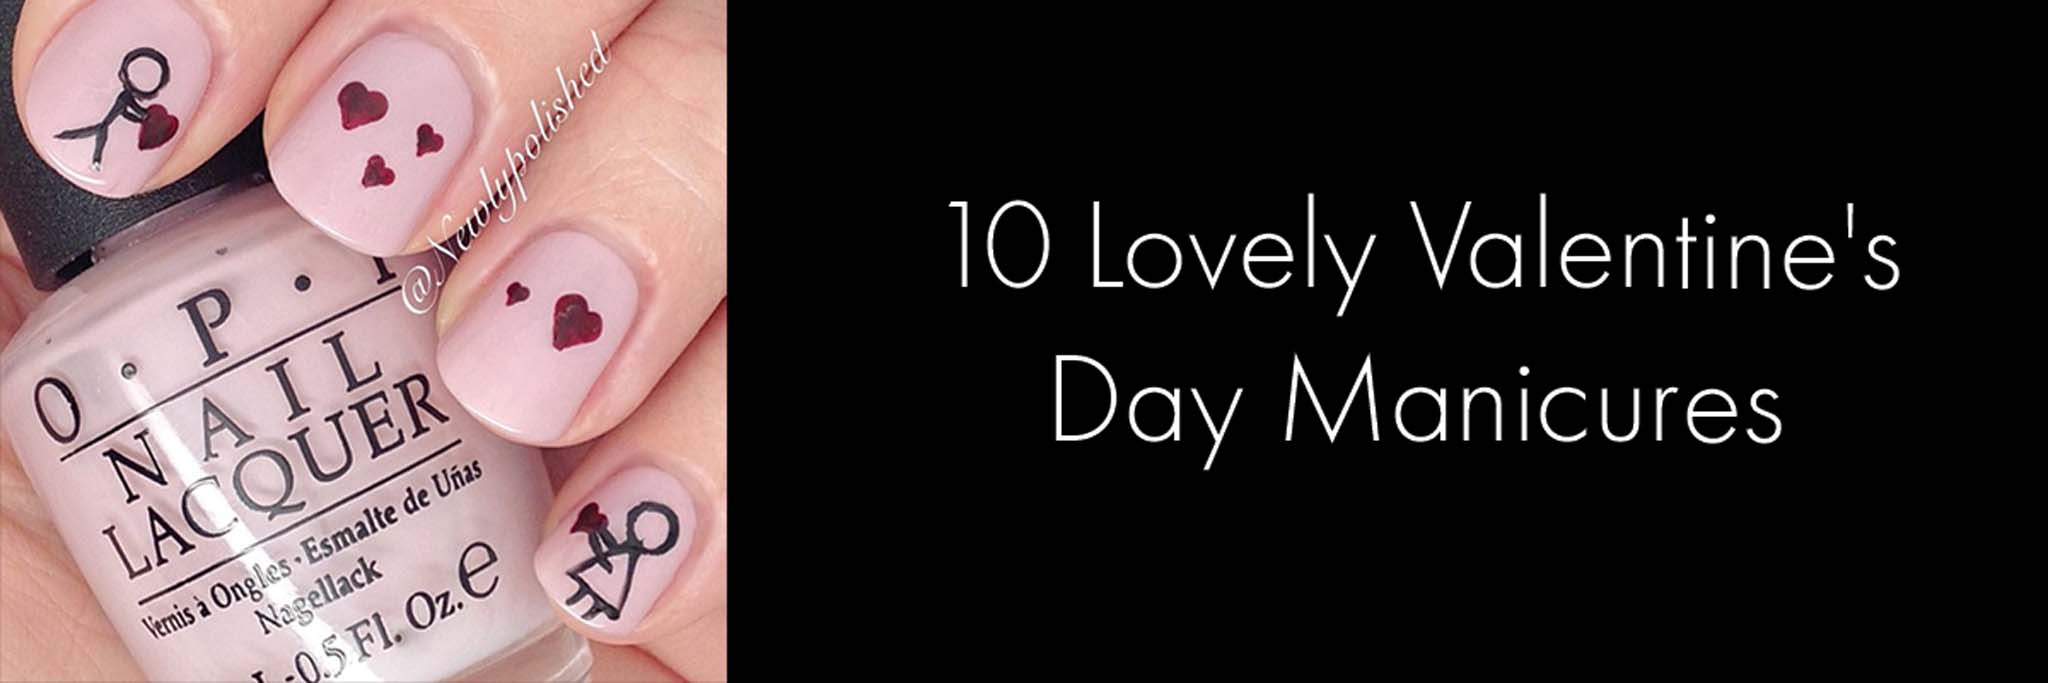 10 lovely valentines day manicures